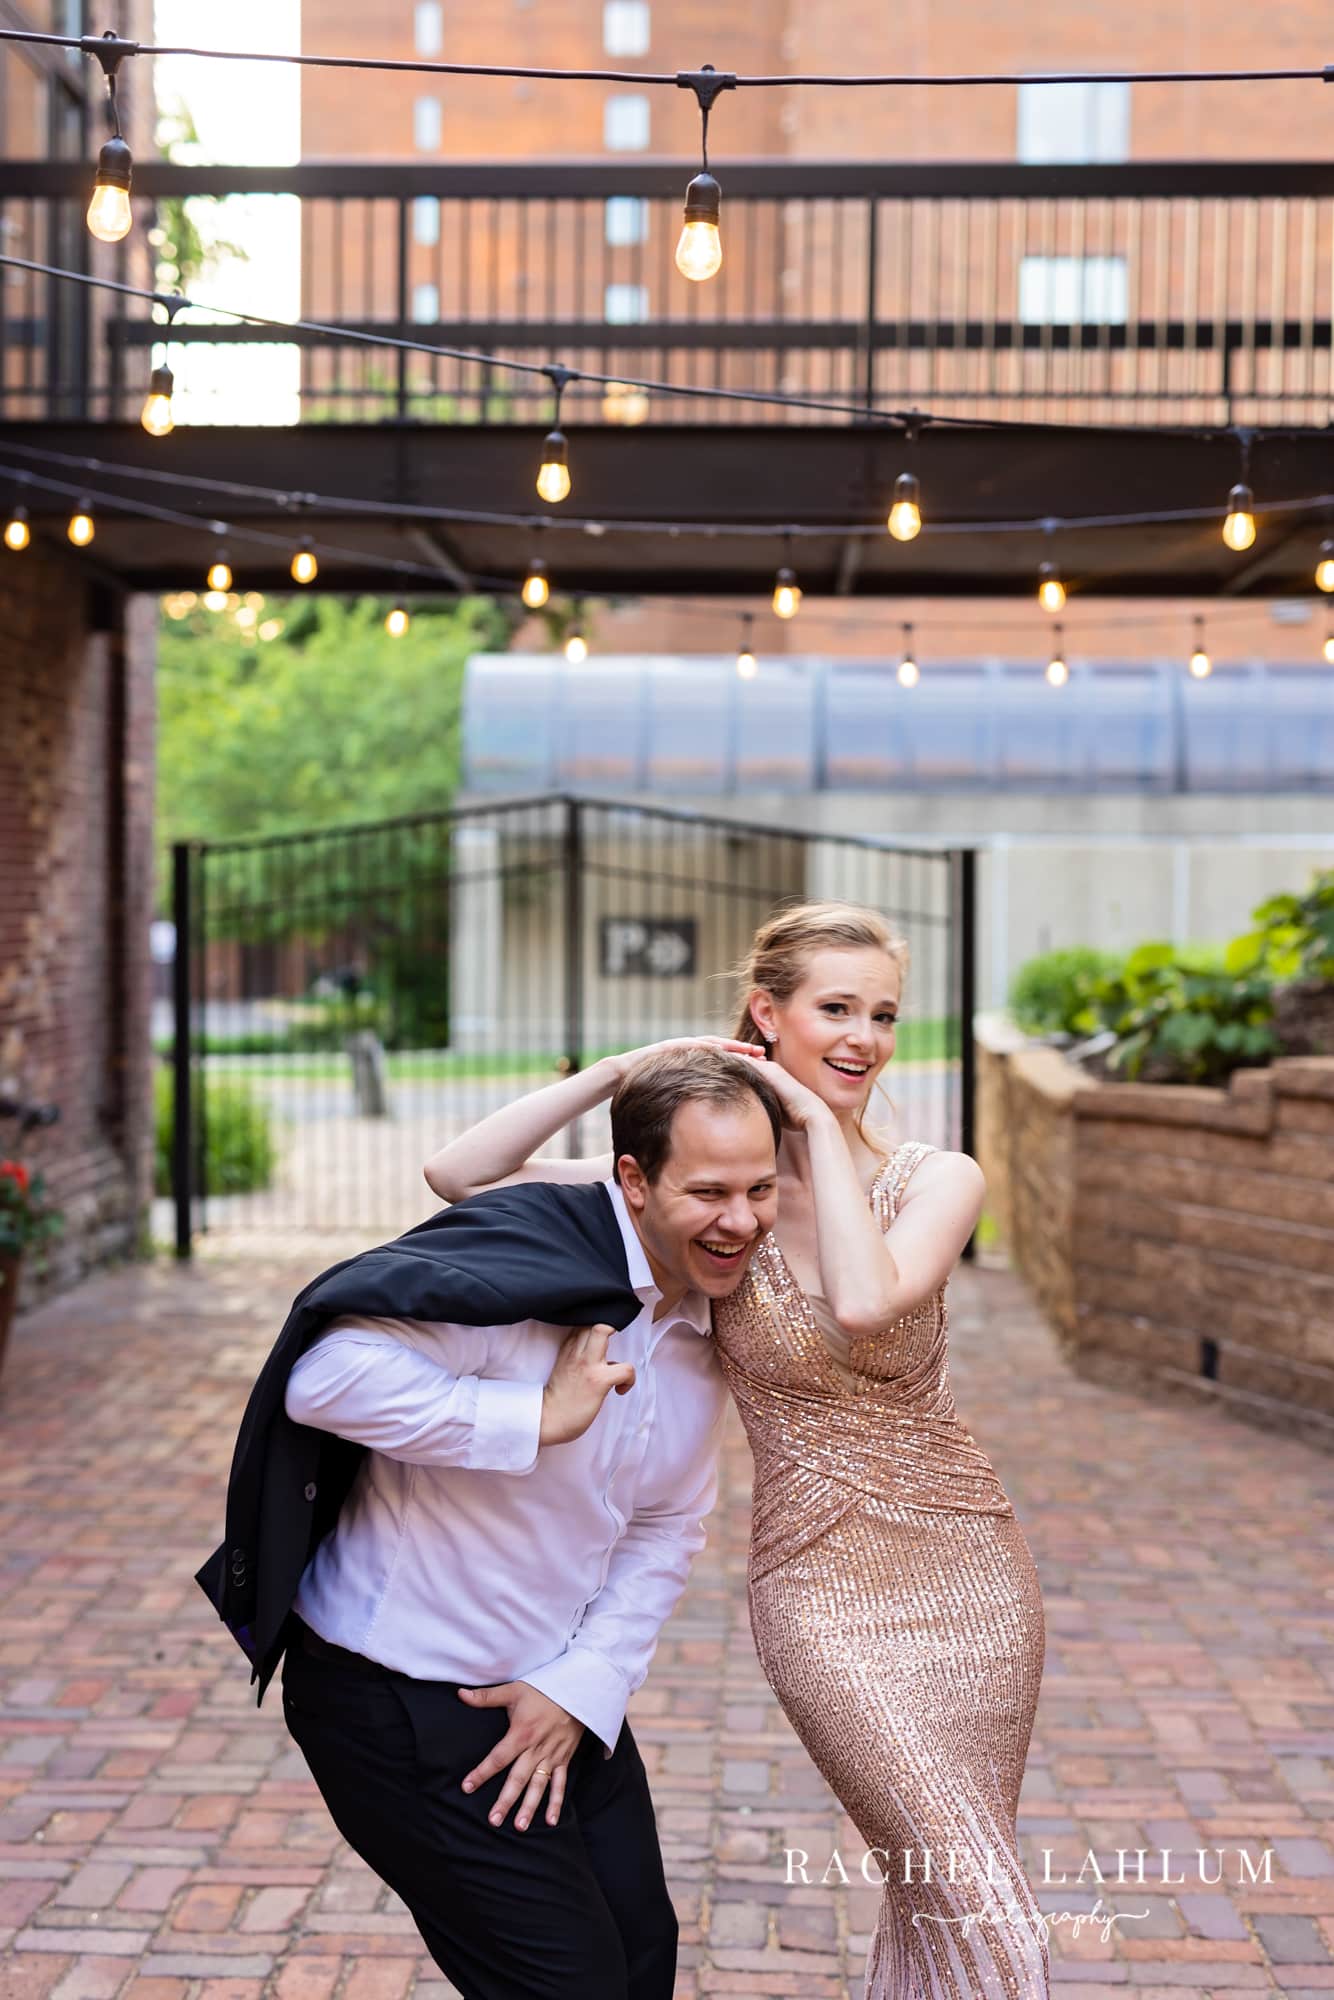 Newlyweds make a silly pose in the courtyard of The Minneapolis Event Center.